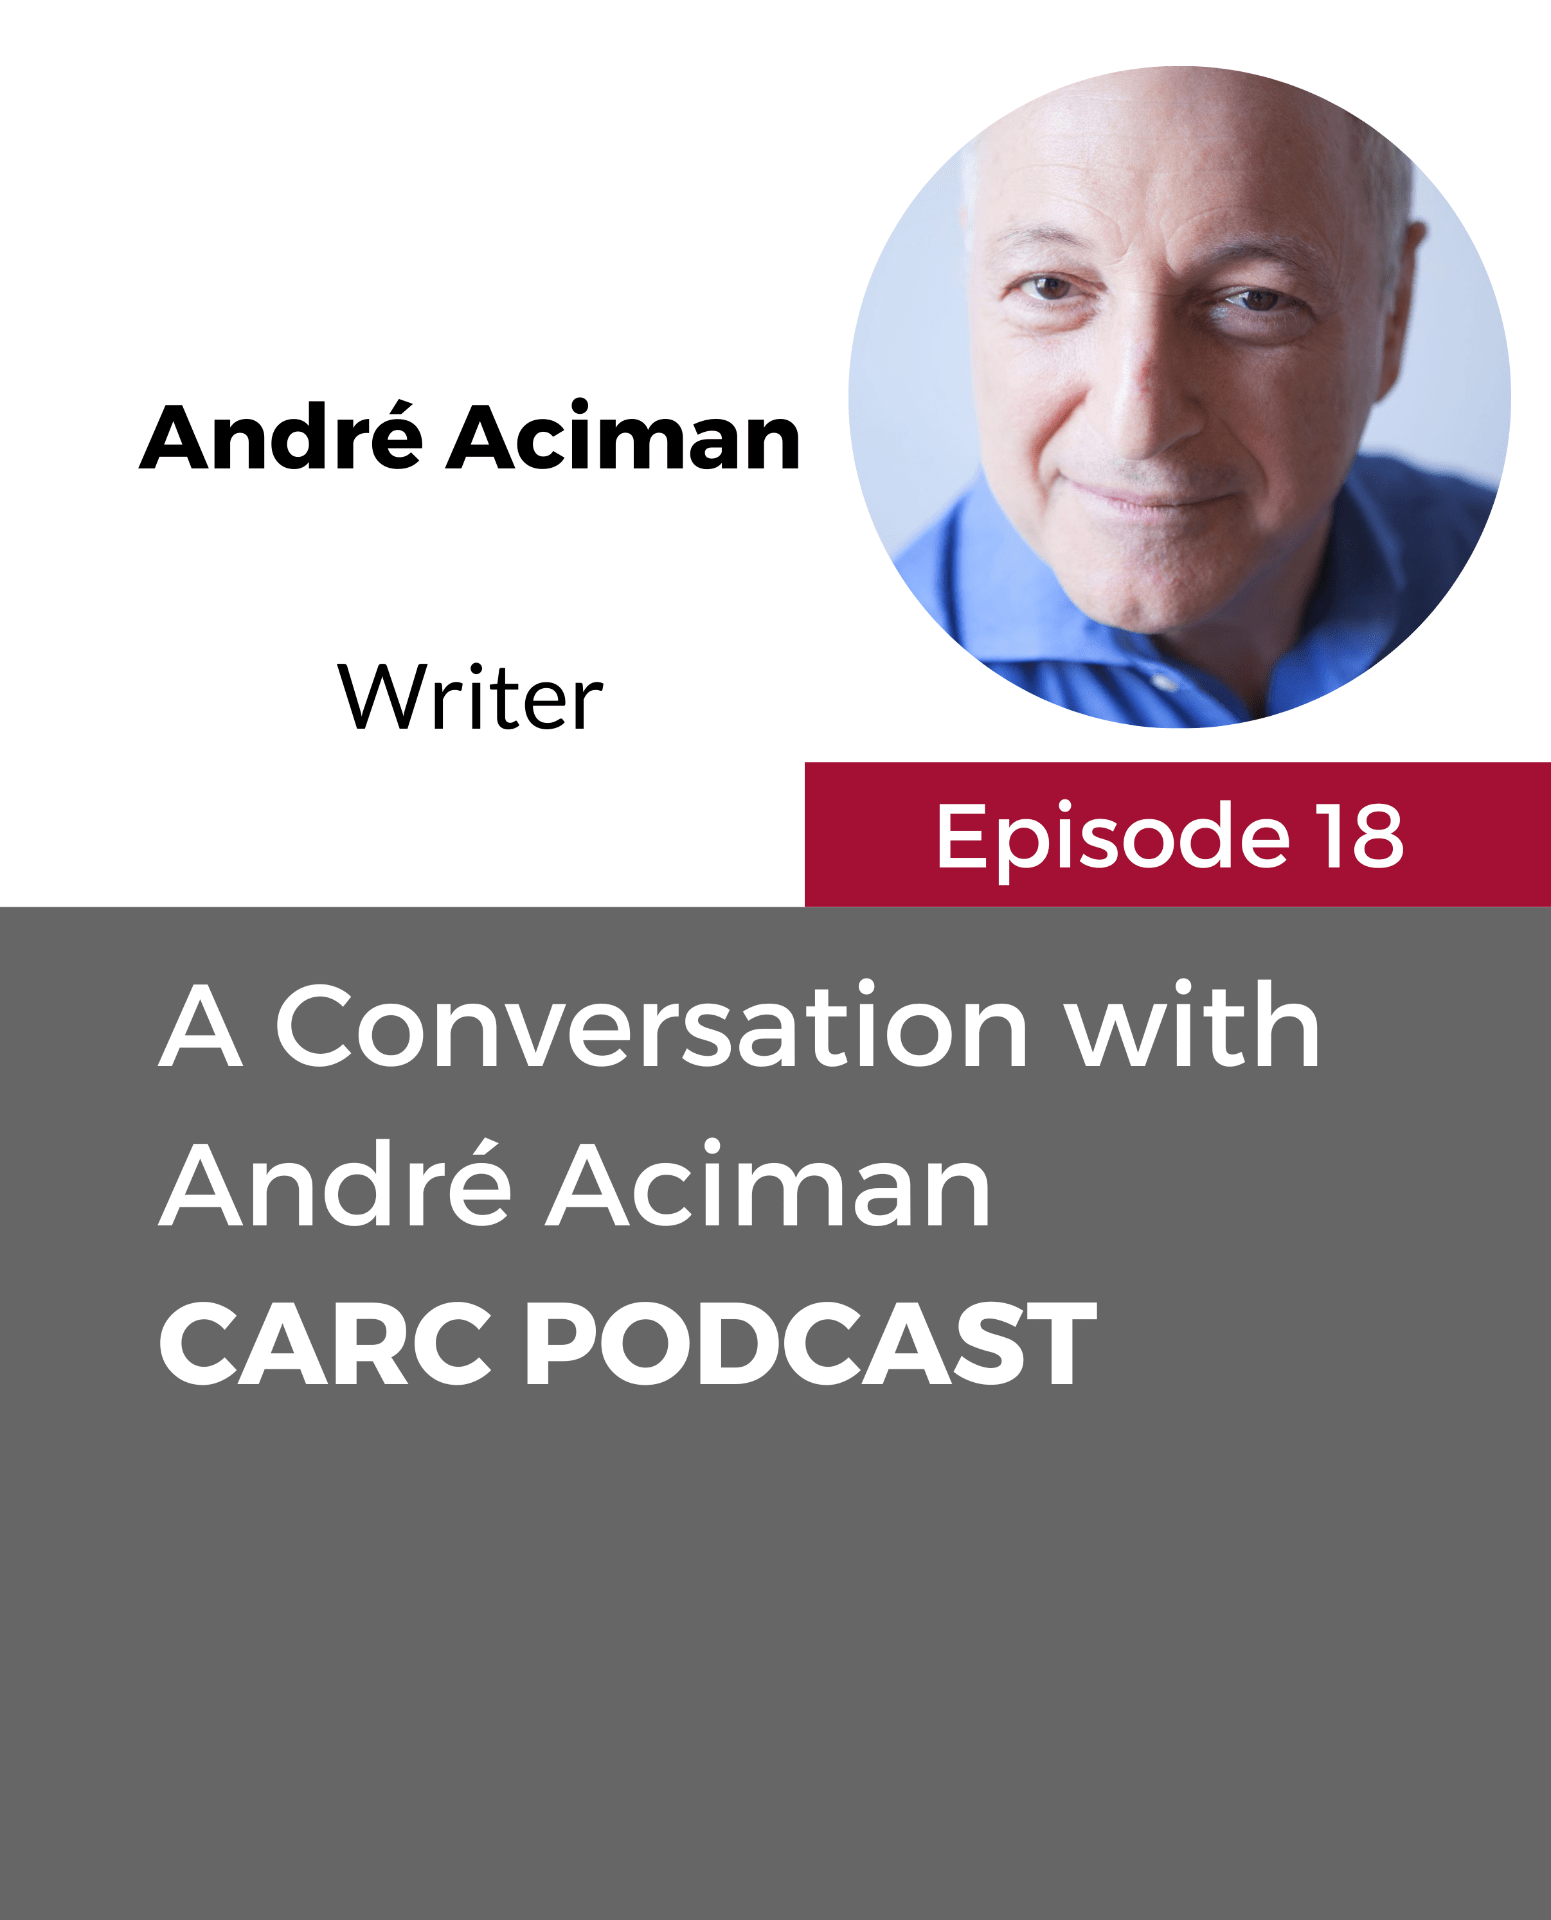 CARC Podcast with Andre Aciman